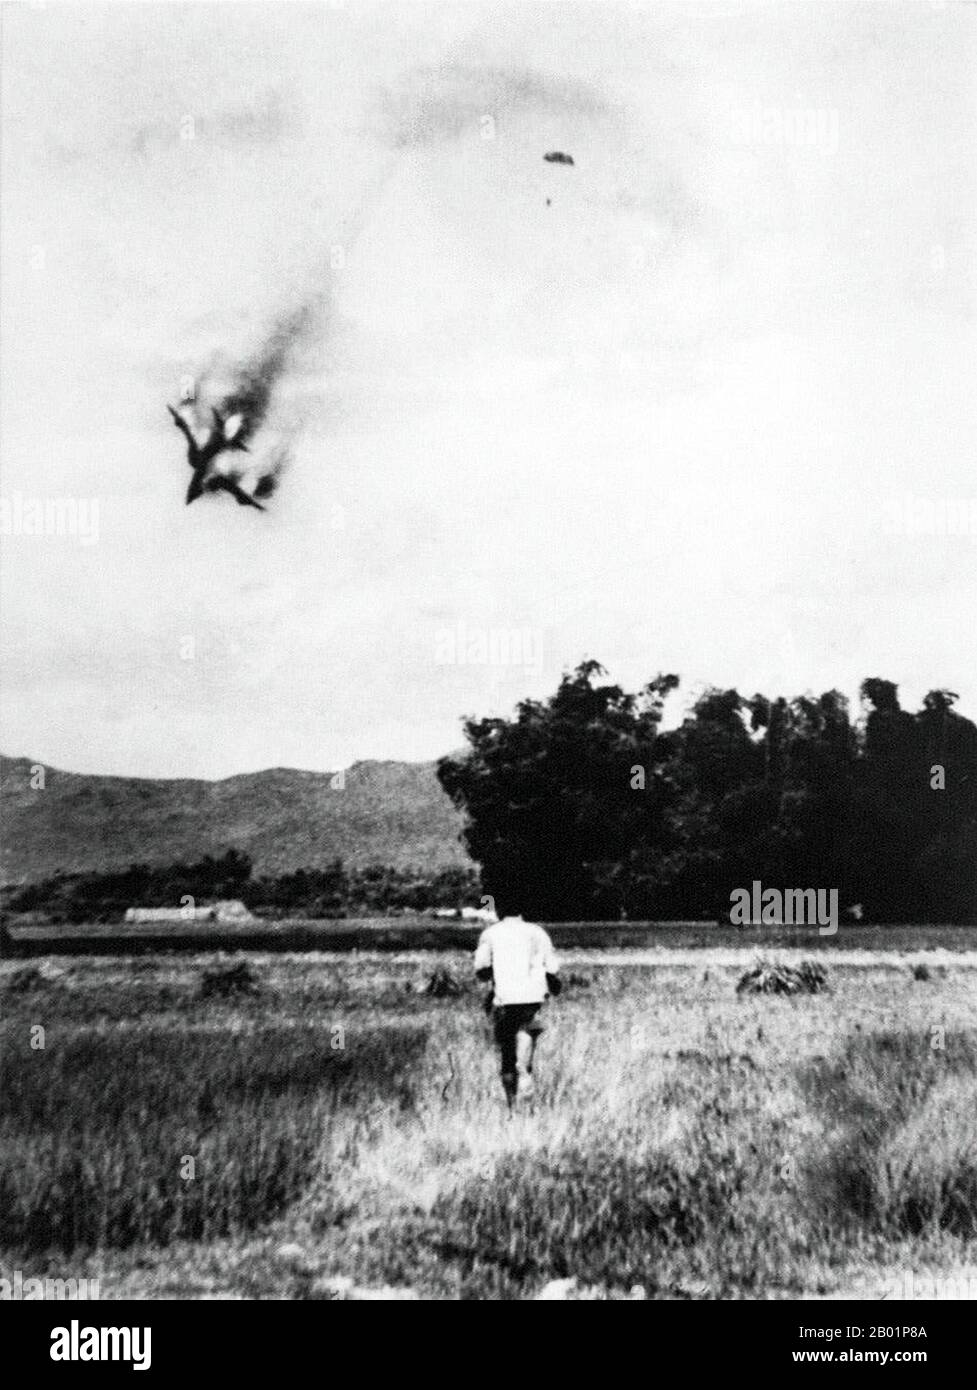 Vietnam: A USAF F-105 warplane is shot down near Vinh Phuc, North Vietnam, in September 1966.  The pilot can be seen parachuting to safety - and captivity.  The Second Indochina War, known in America as the Vietnam War, was a Cold War era military conflict that occurred in Vietnam, Laos, and Cambodia from 1 November 1955 to the fall of Saigon on 30 April 1975. This war followed the First Indochina War and was fought between North Vietnam, supported by its communist allies, and the government of South Vietnam, supported by the U.S. and other anti-communist nations. Stock Photo